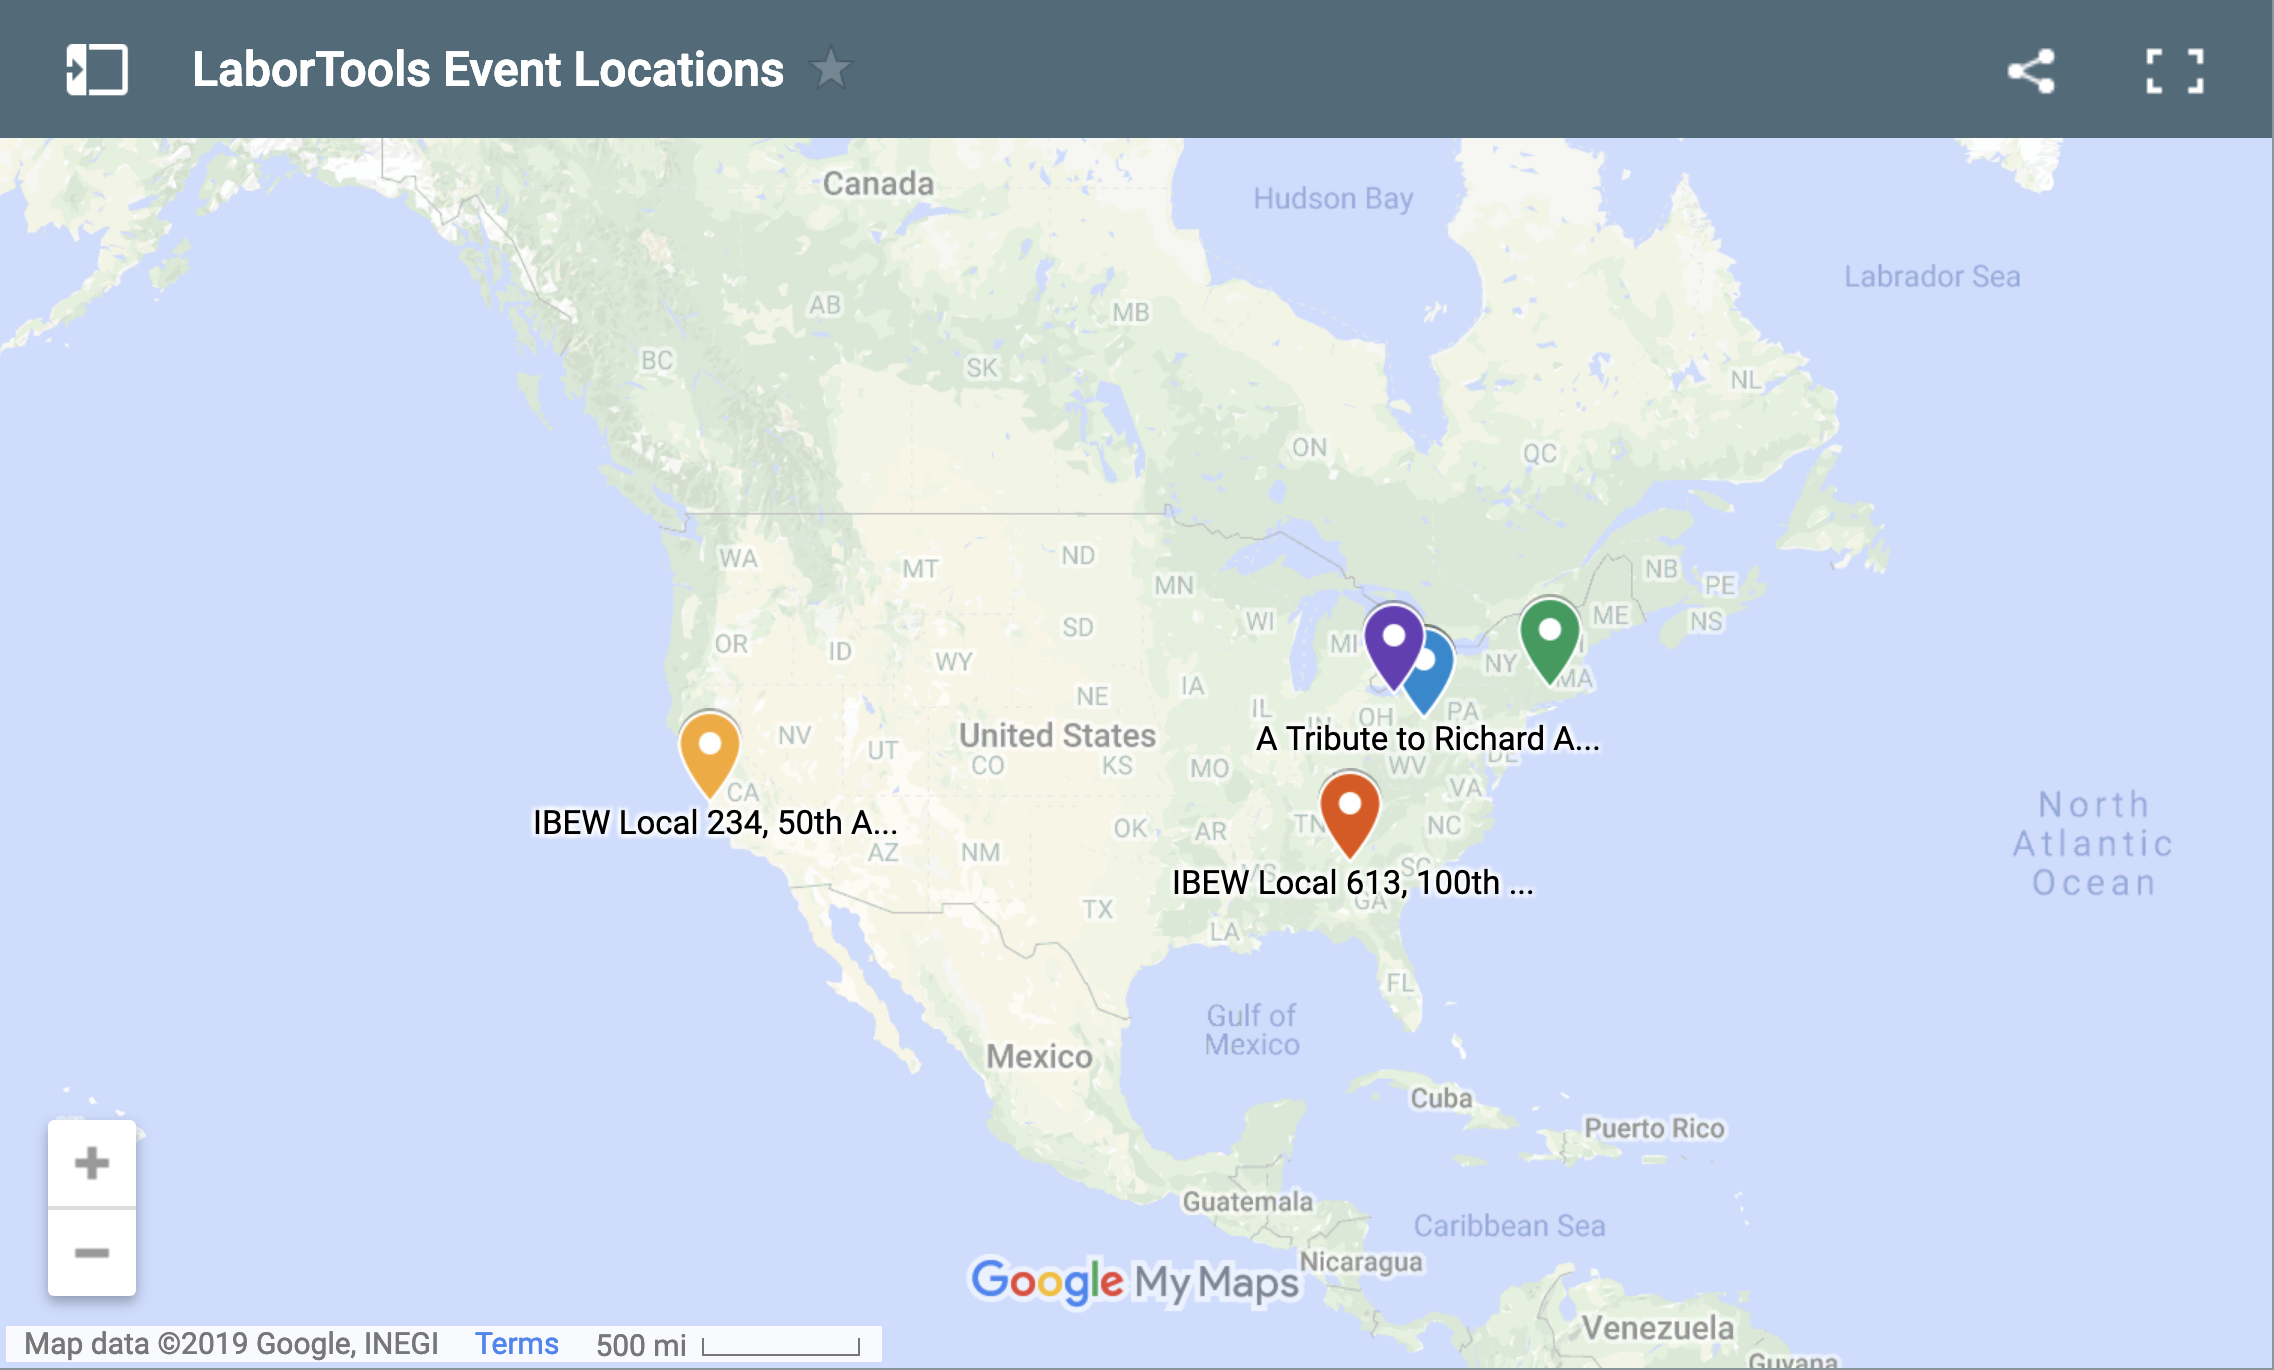 A Google Map showing all of the events around the country that LaborTools has developed